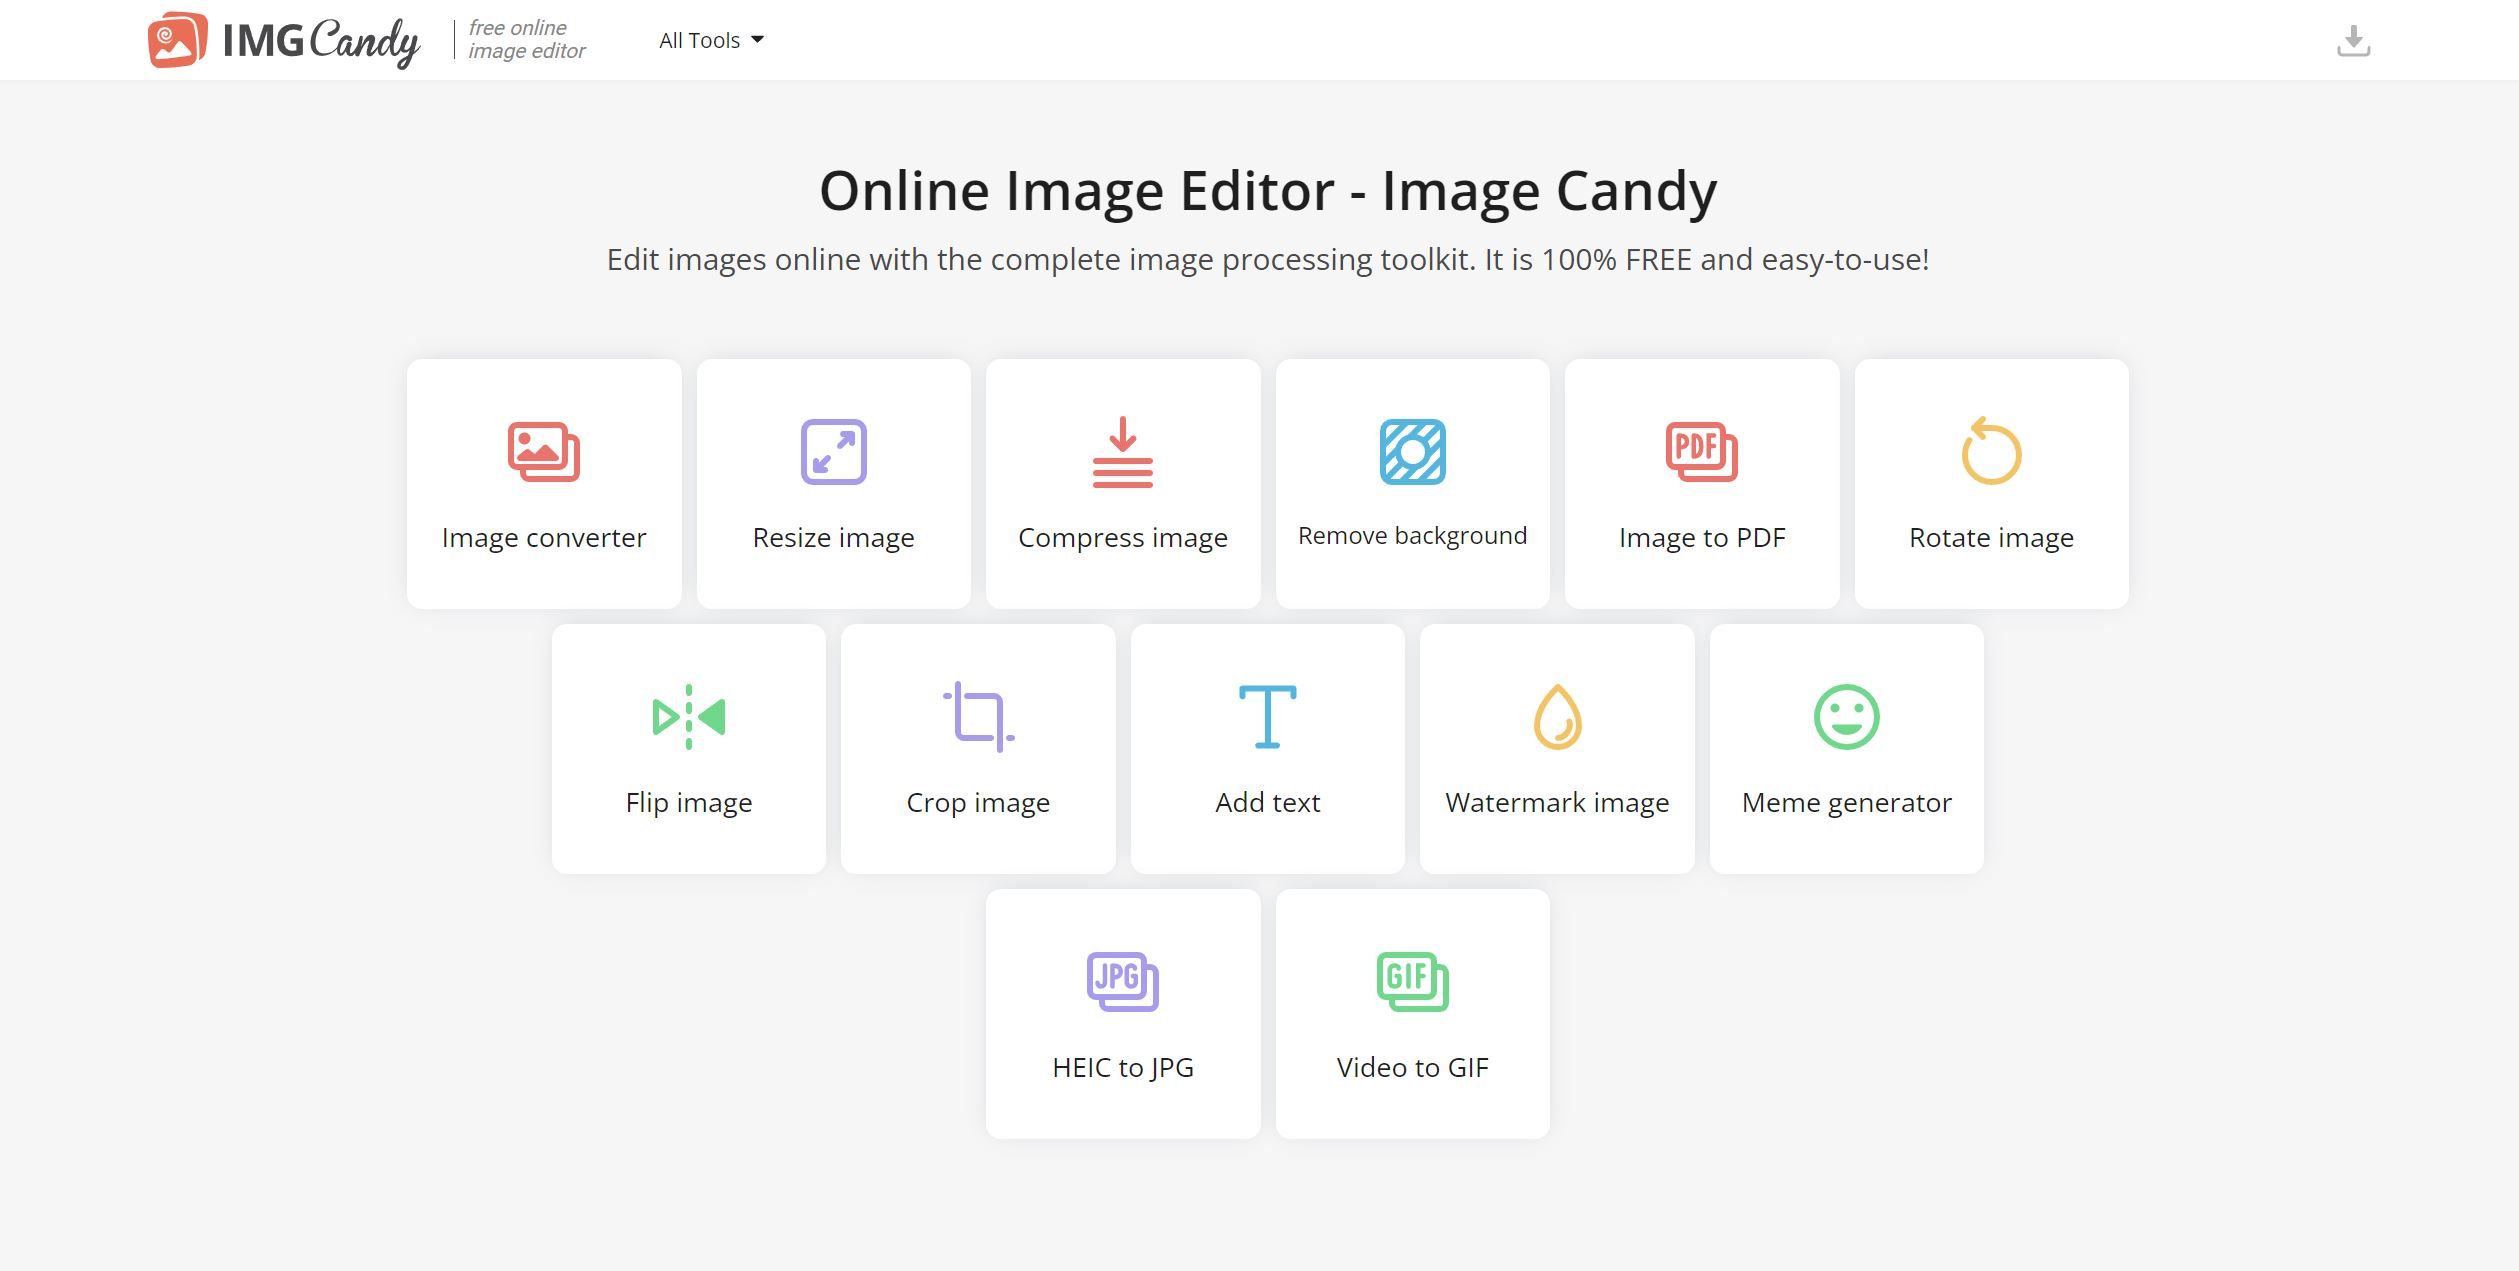 Image CandyImage Candy is an online image editor that offers